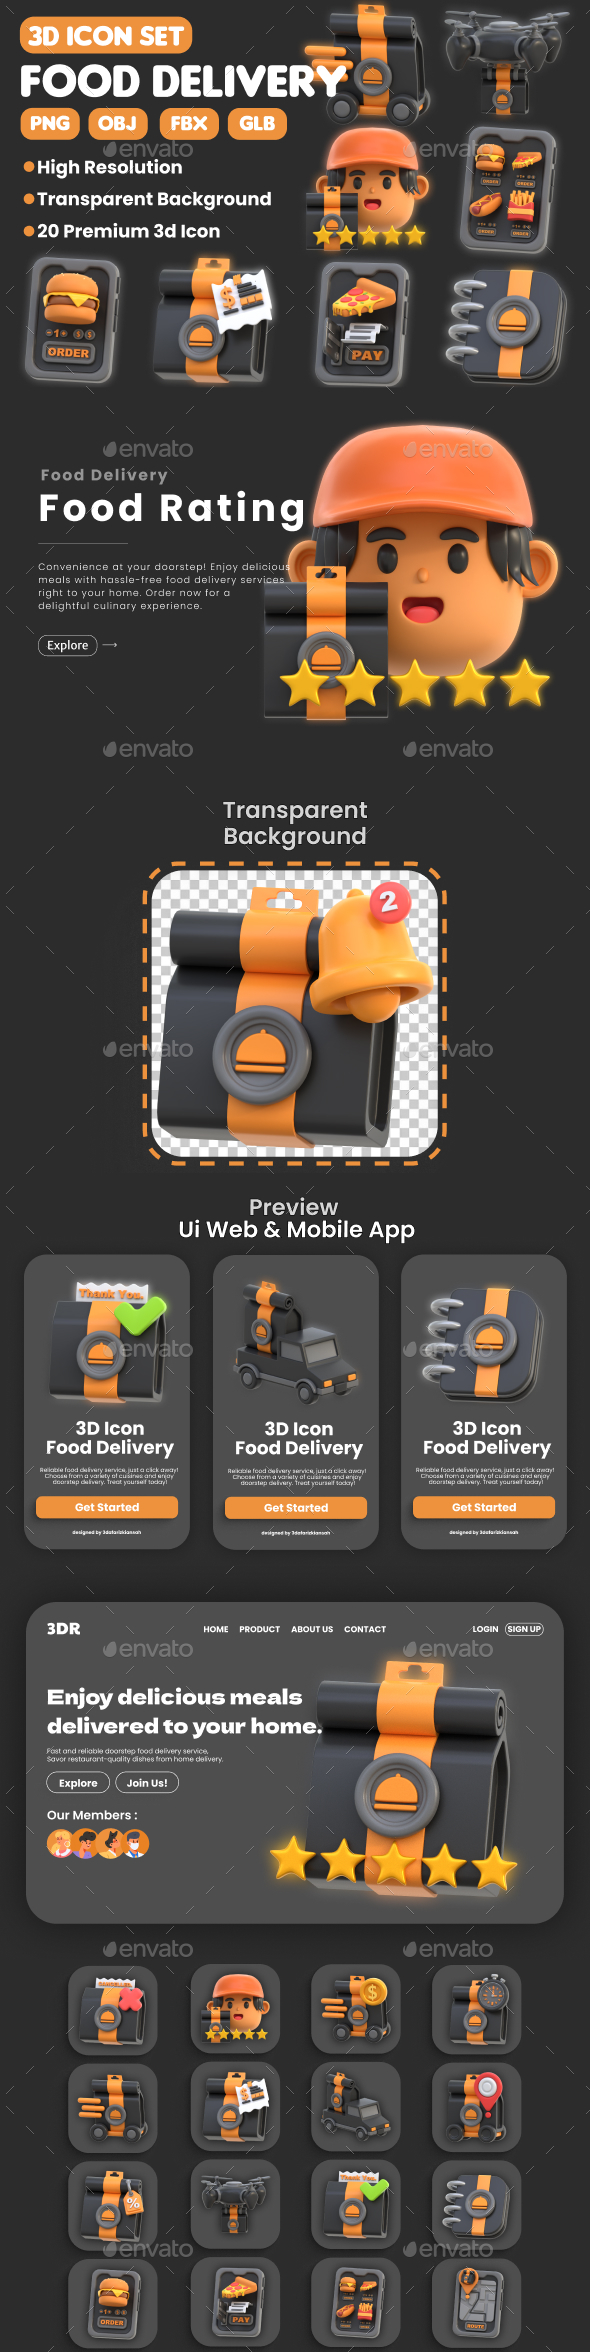 [DOWNLOAD]3D Food Delivery